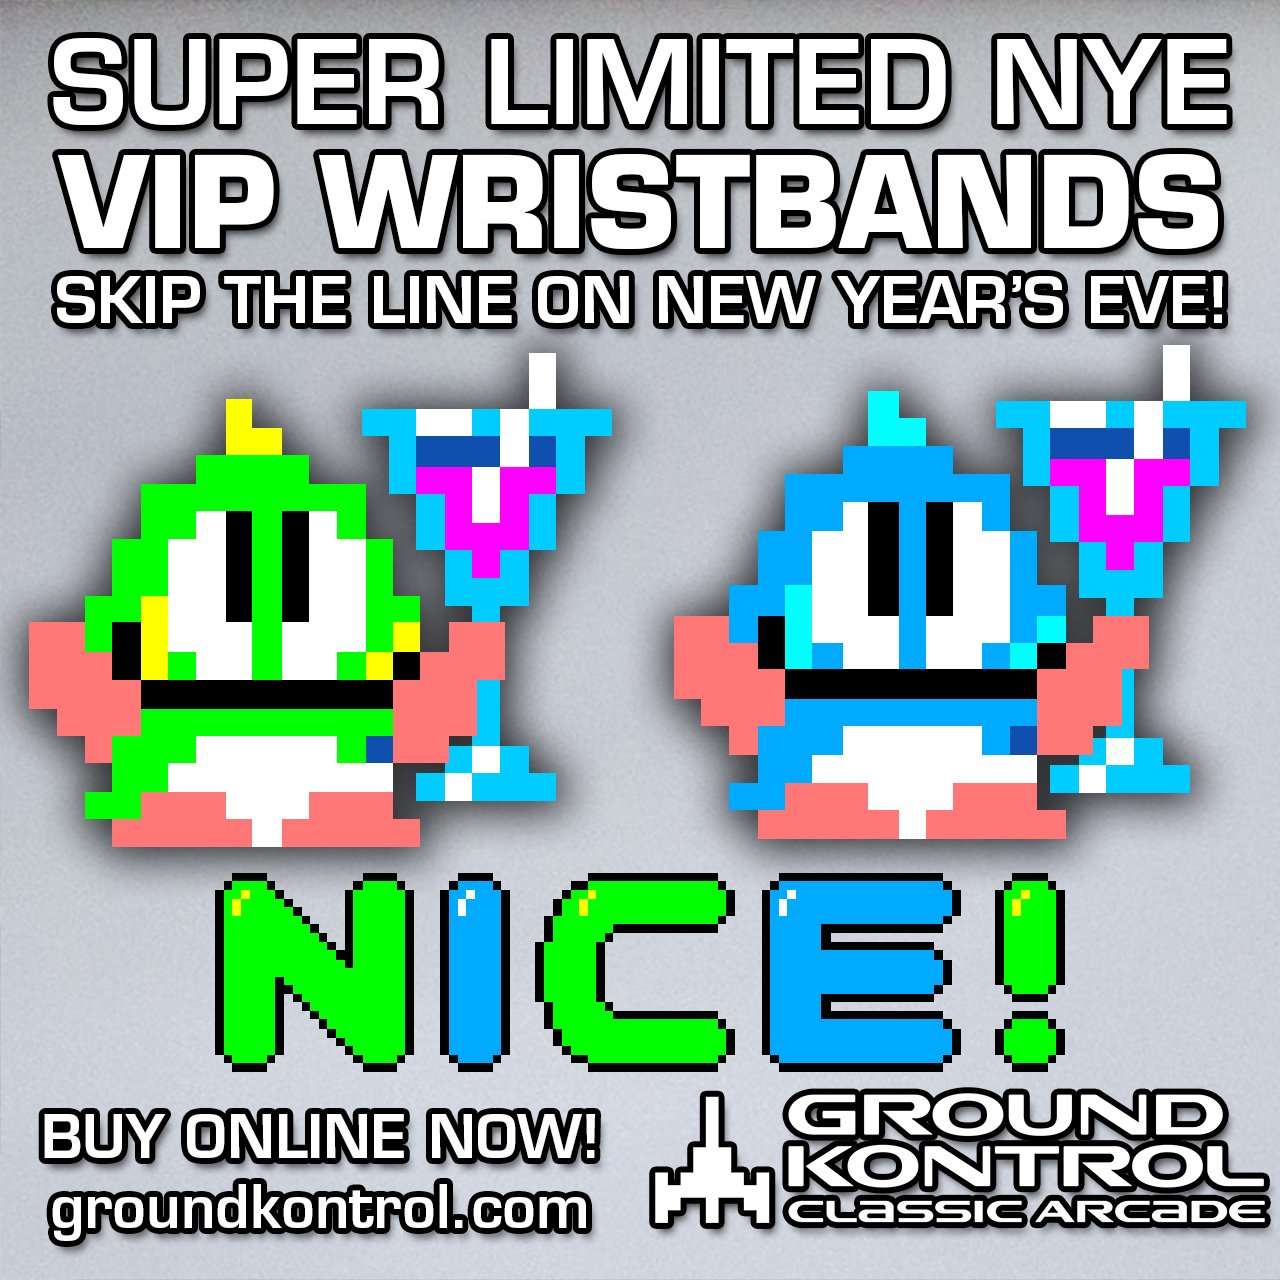 Now Available: New Year’s Eve 2016 VIP Wristbands – While They Last!